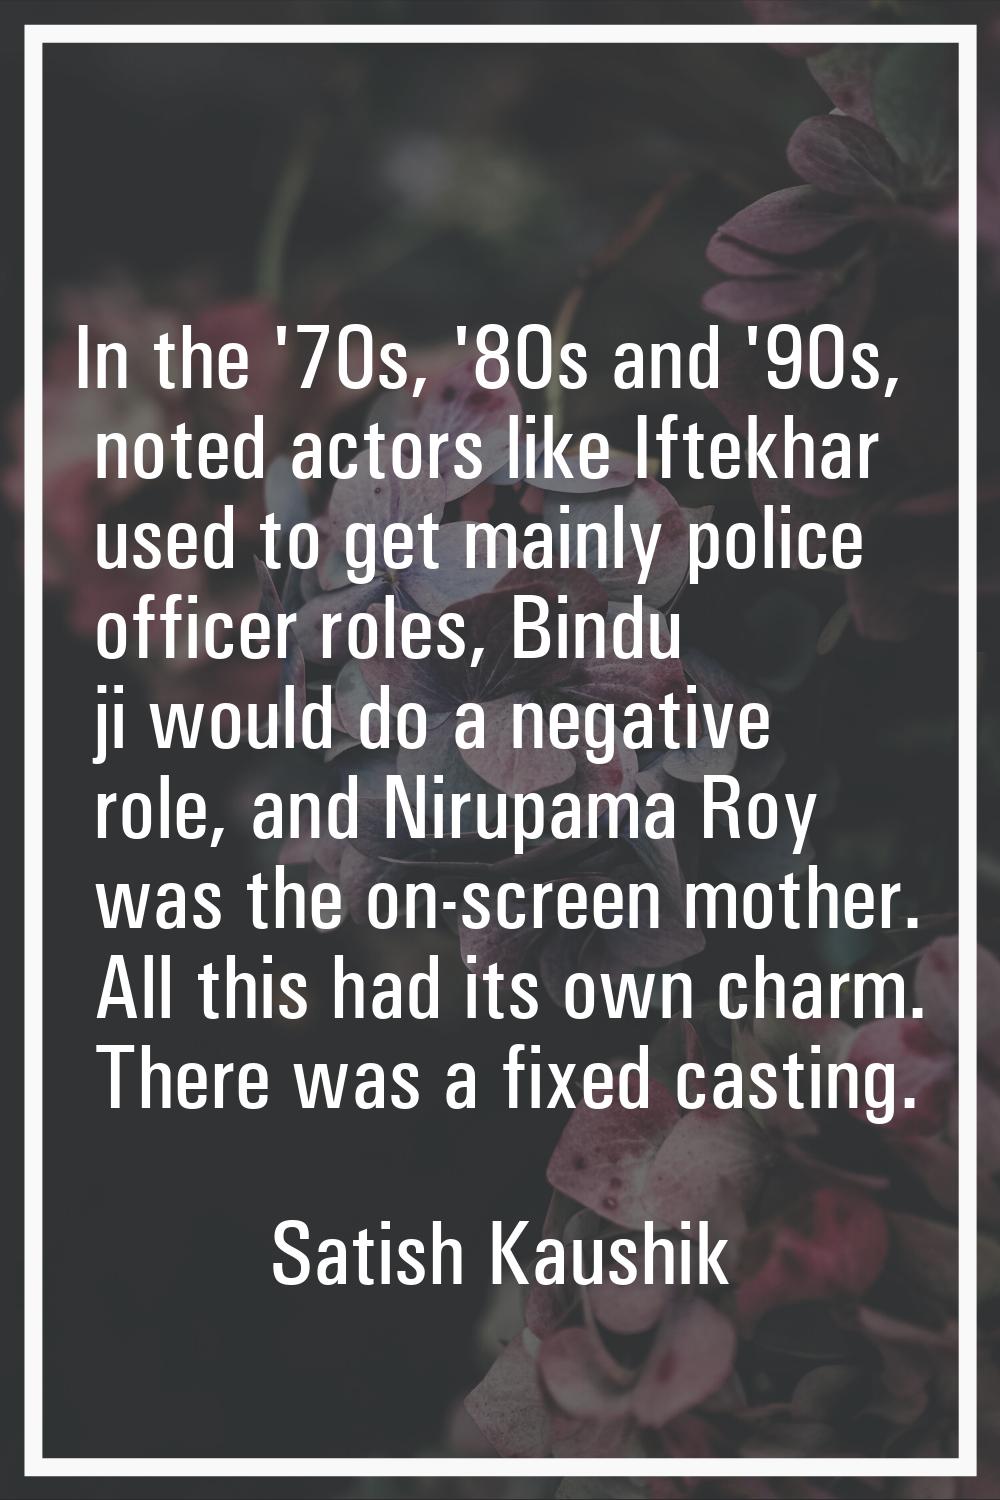 In the '70s, '80s and '90s, noted actors like Iftekhar used to get mainly police officer roles, Bin